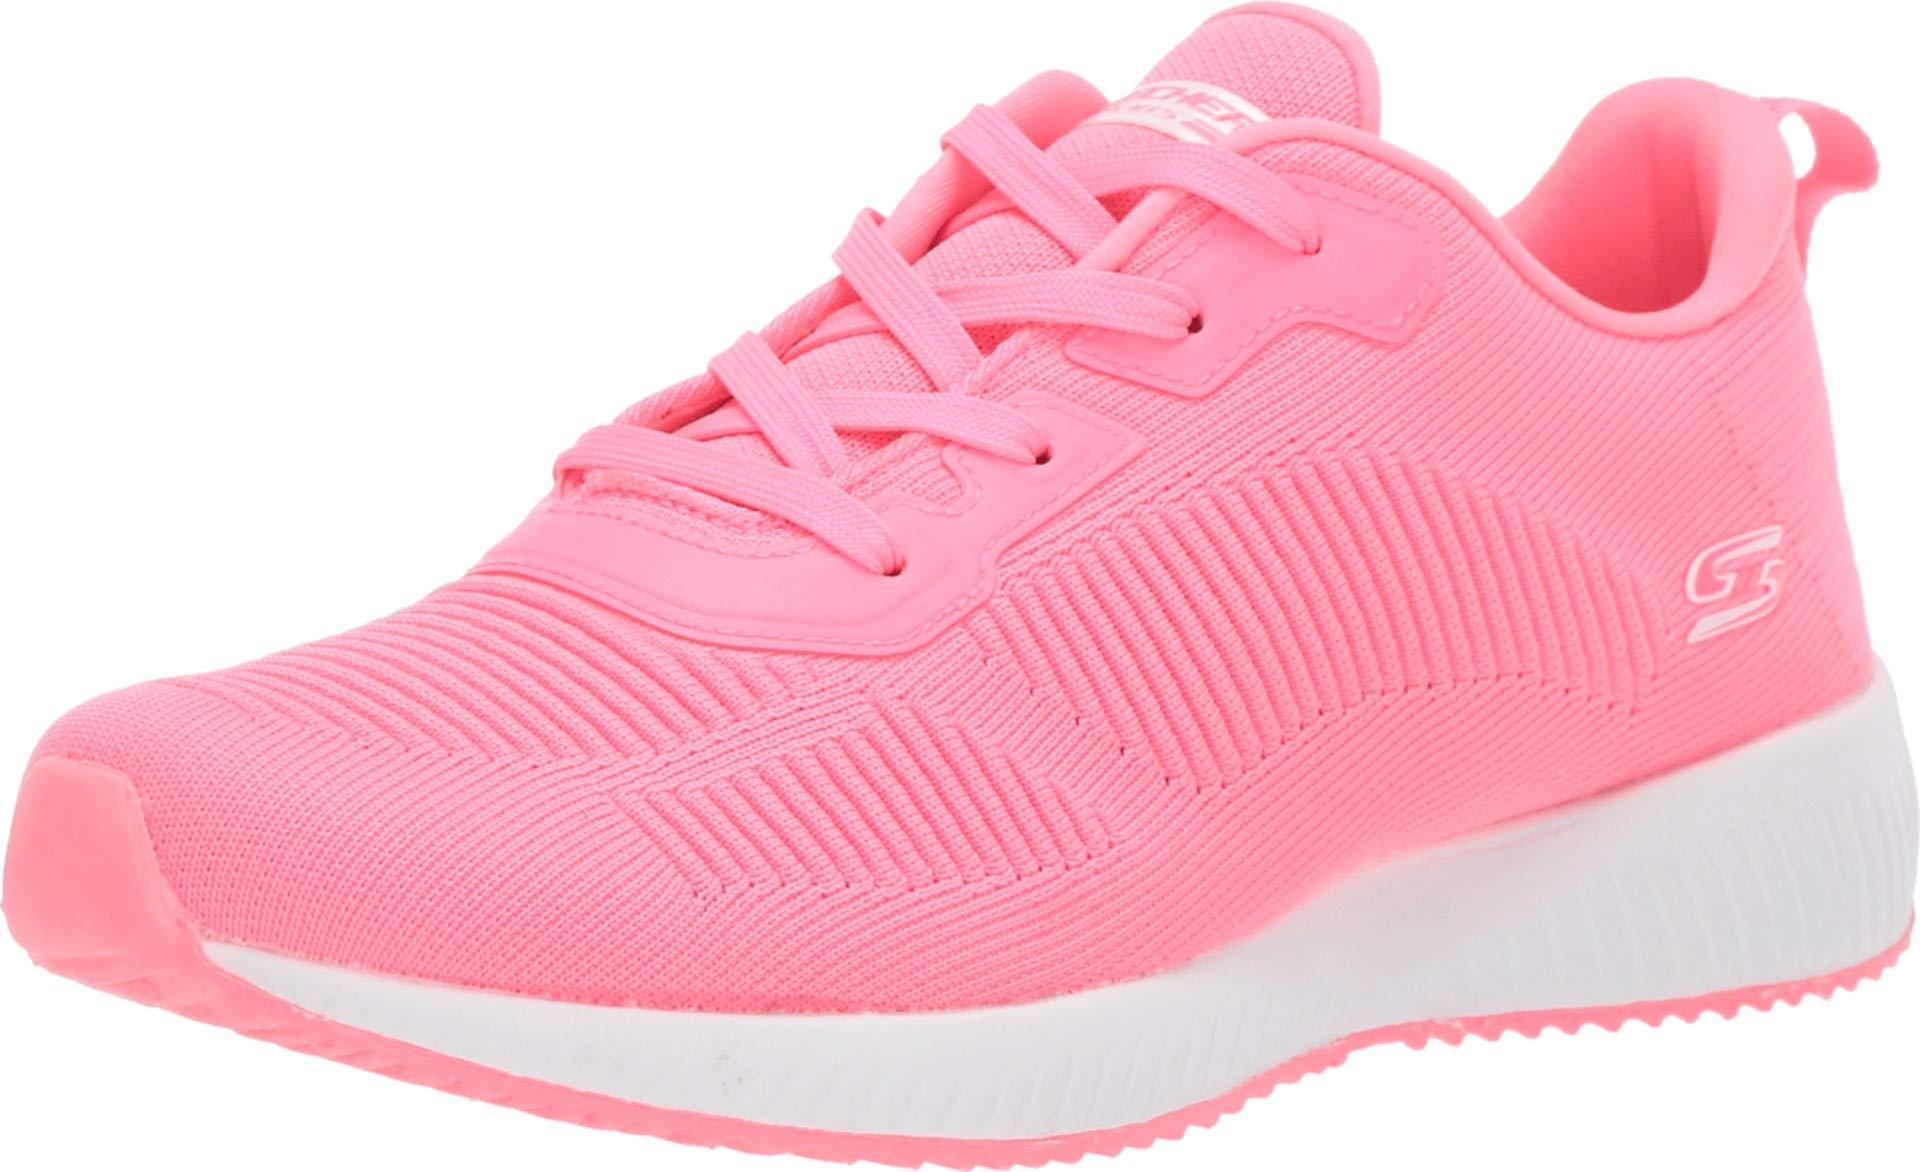 Skechers Bobs Squad Glowrider Sneaker in Pink White (Pink) - Save 37% ...